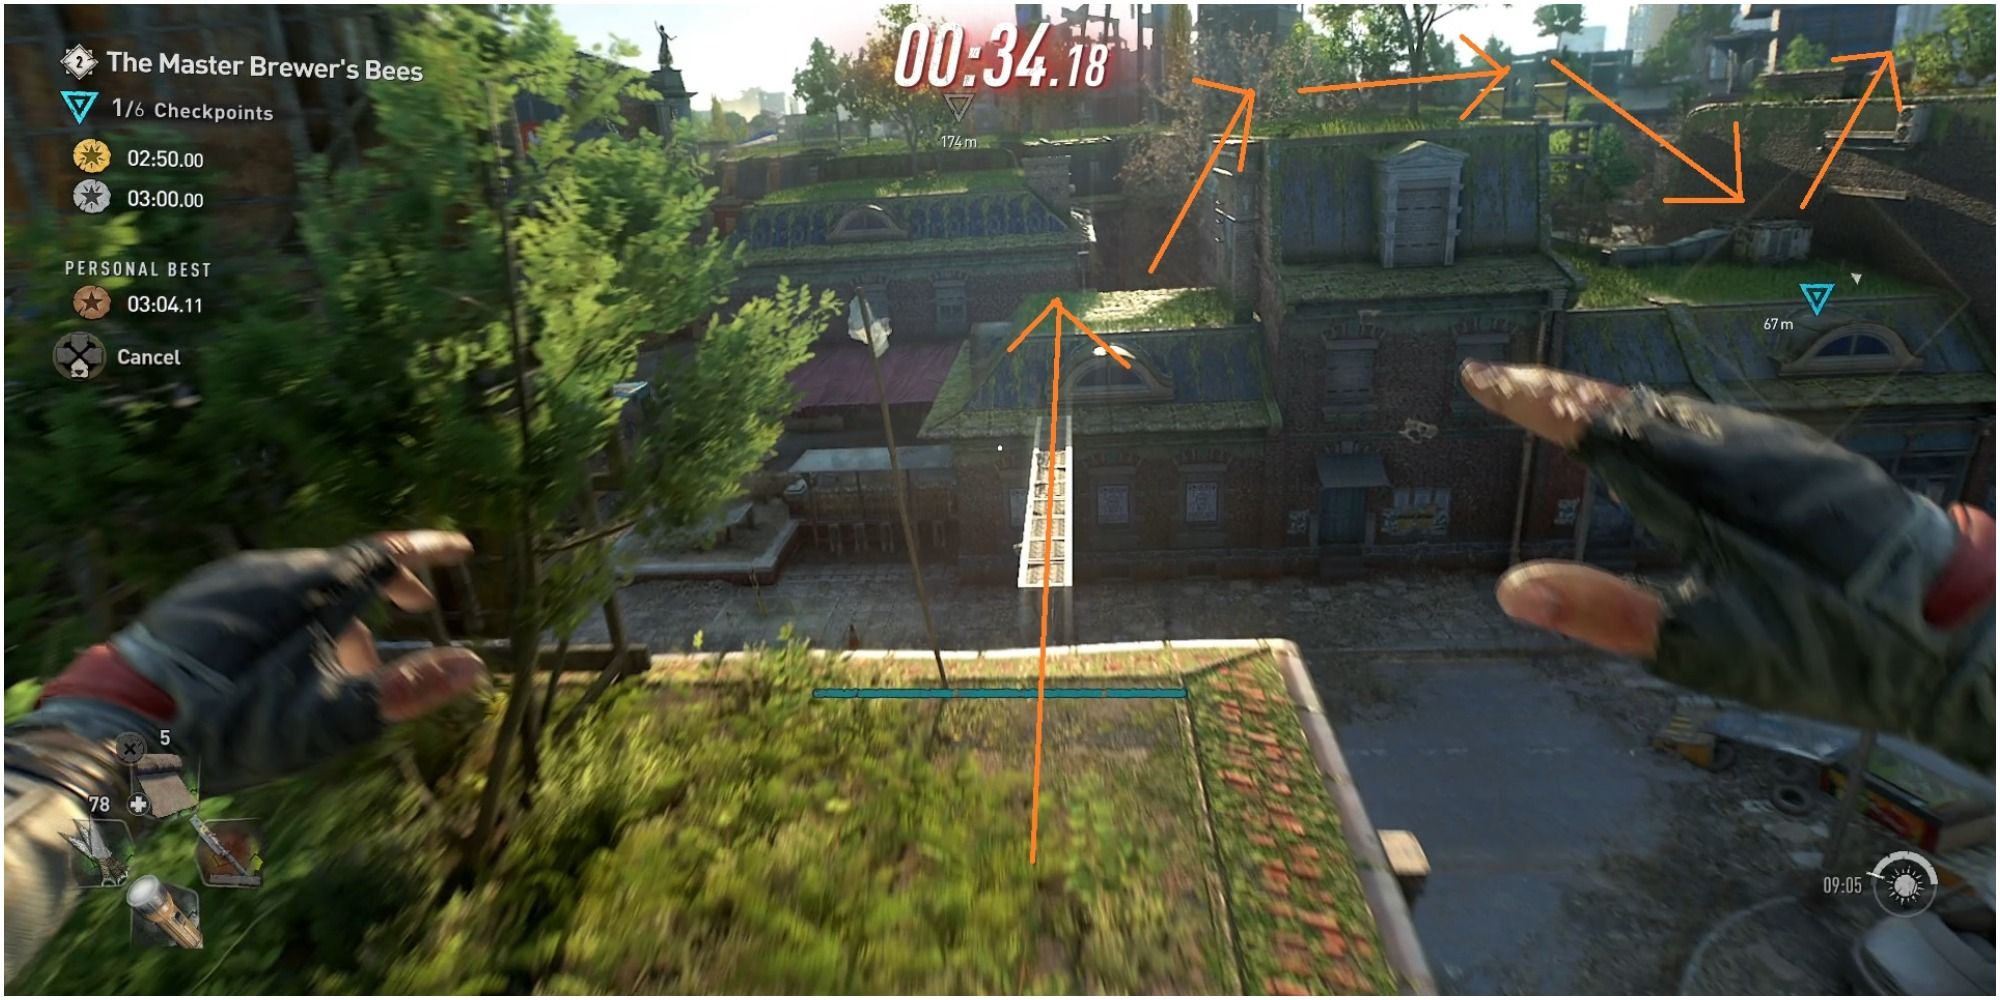 Dying Light 2 Optimal Path To Get To The Second Checkpoint In Master Brewers Bees Pt 2